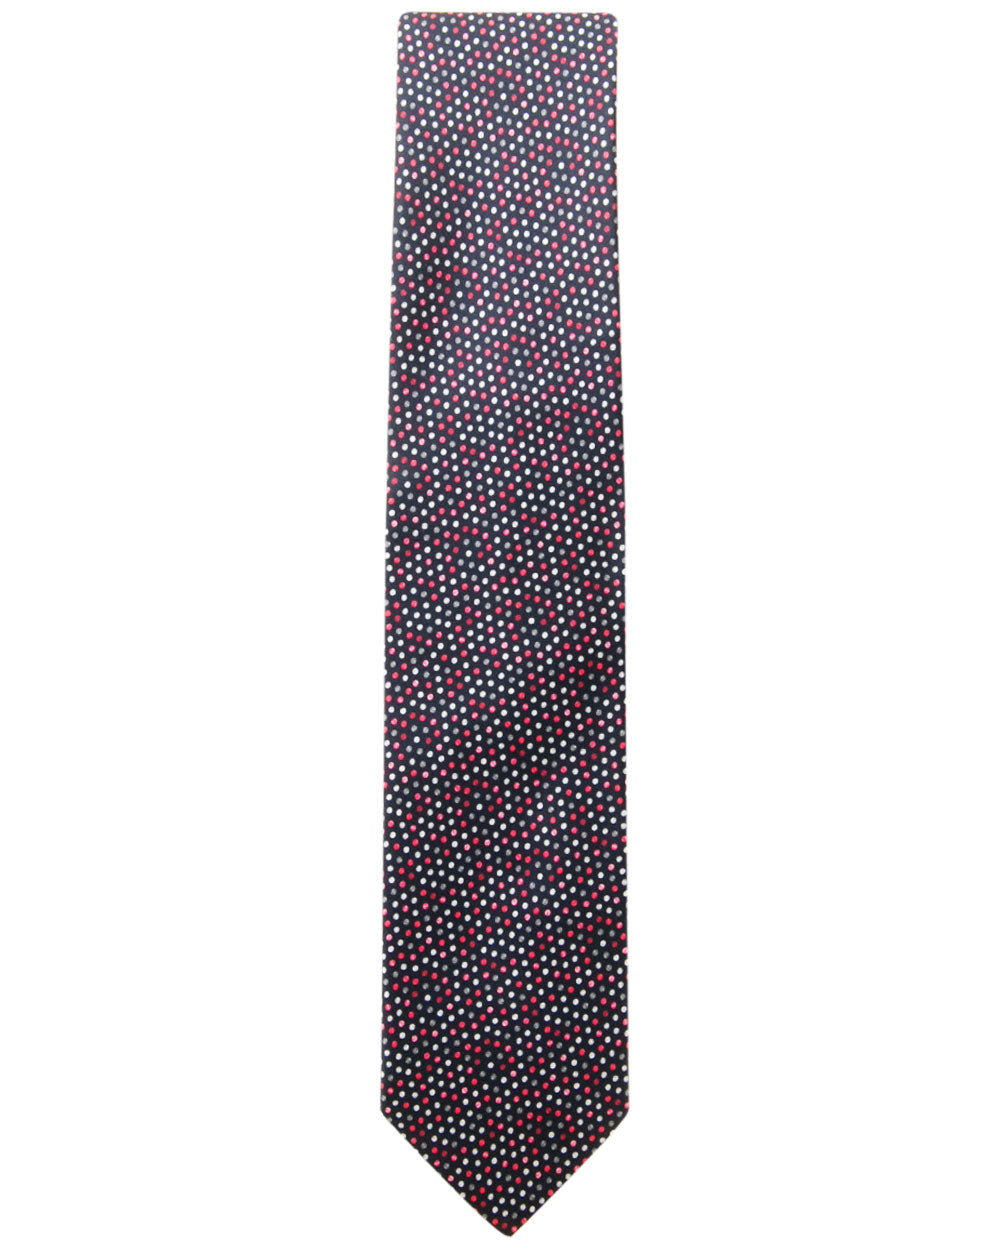 Navy and Red Microdotted Tie